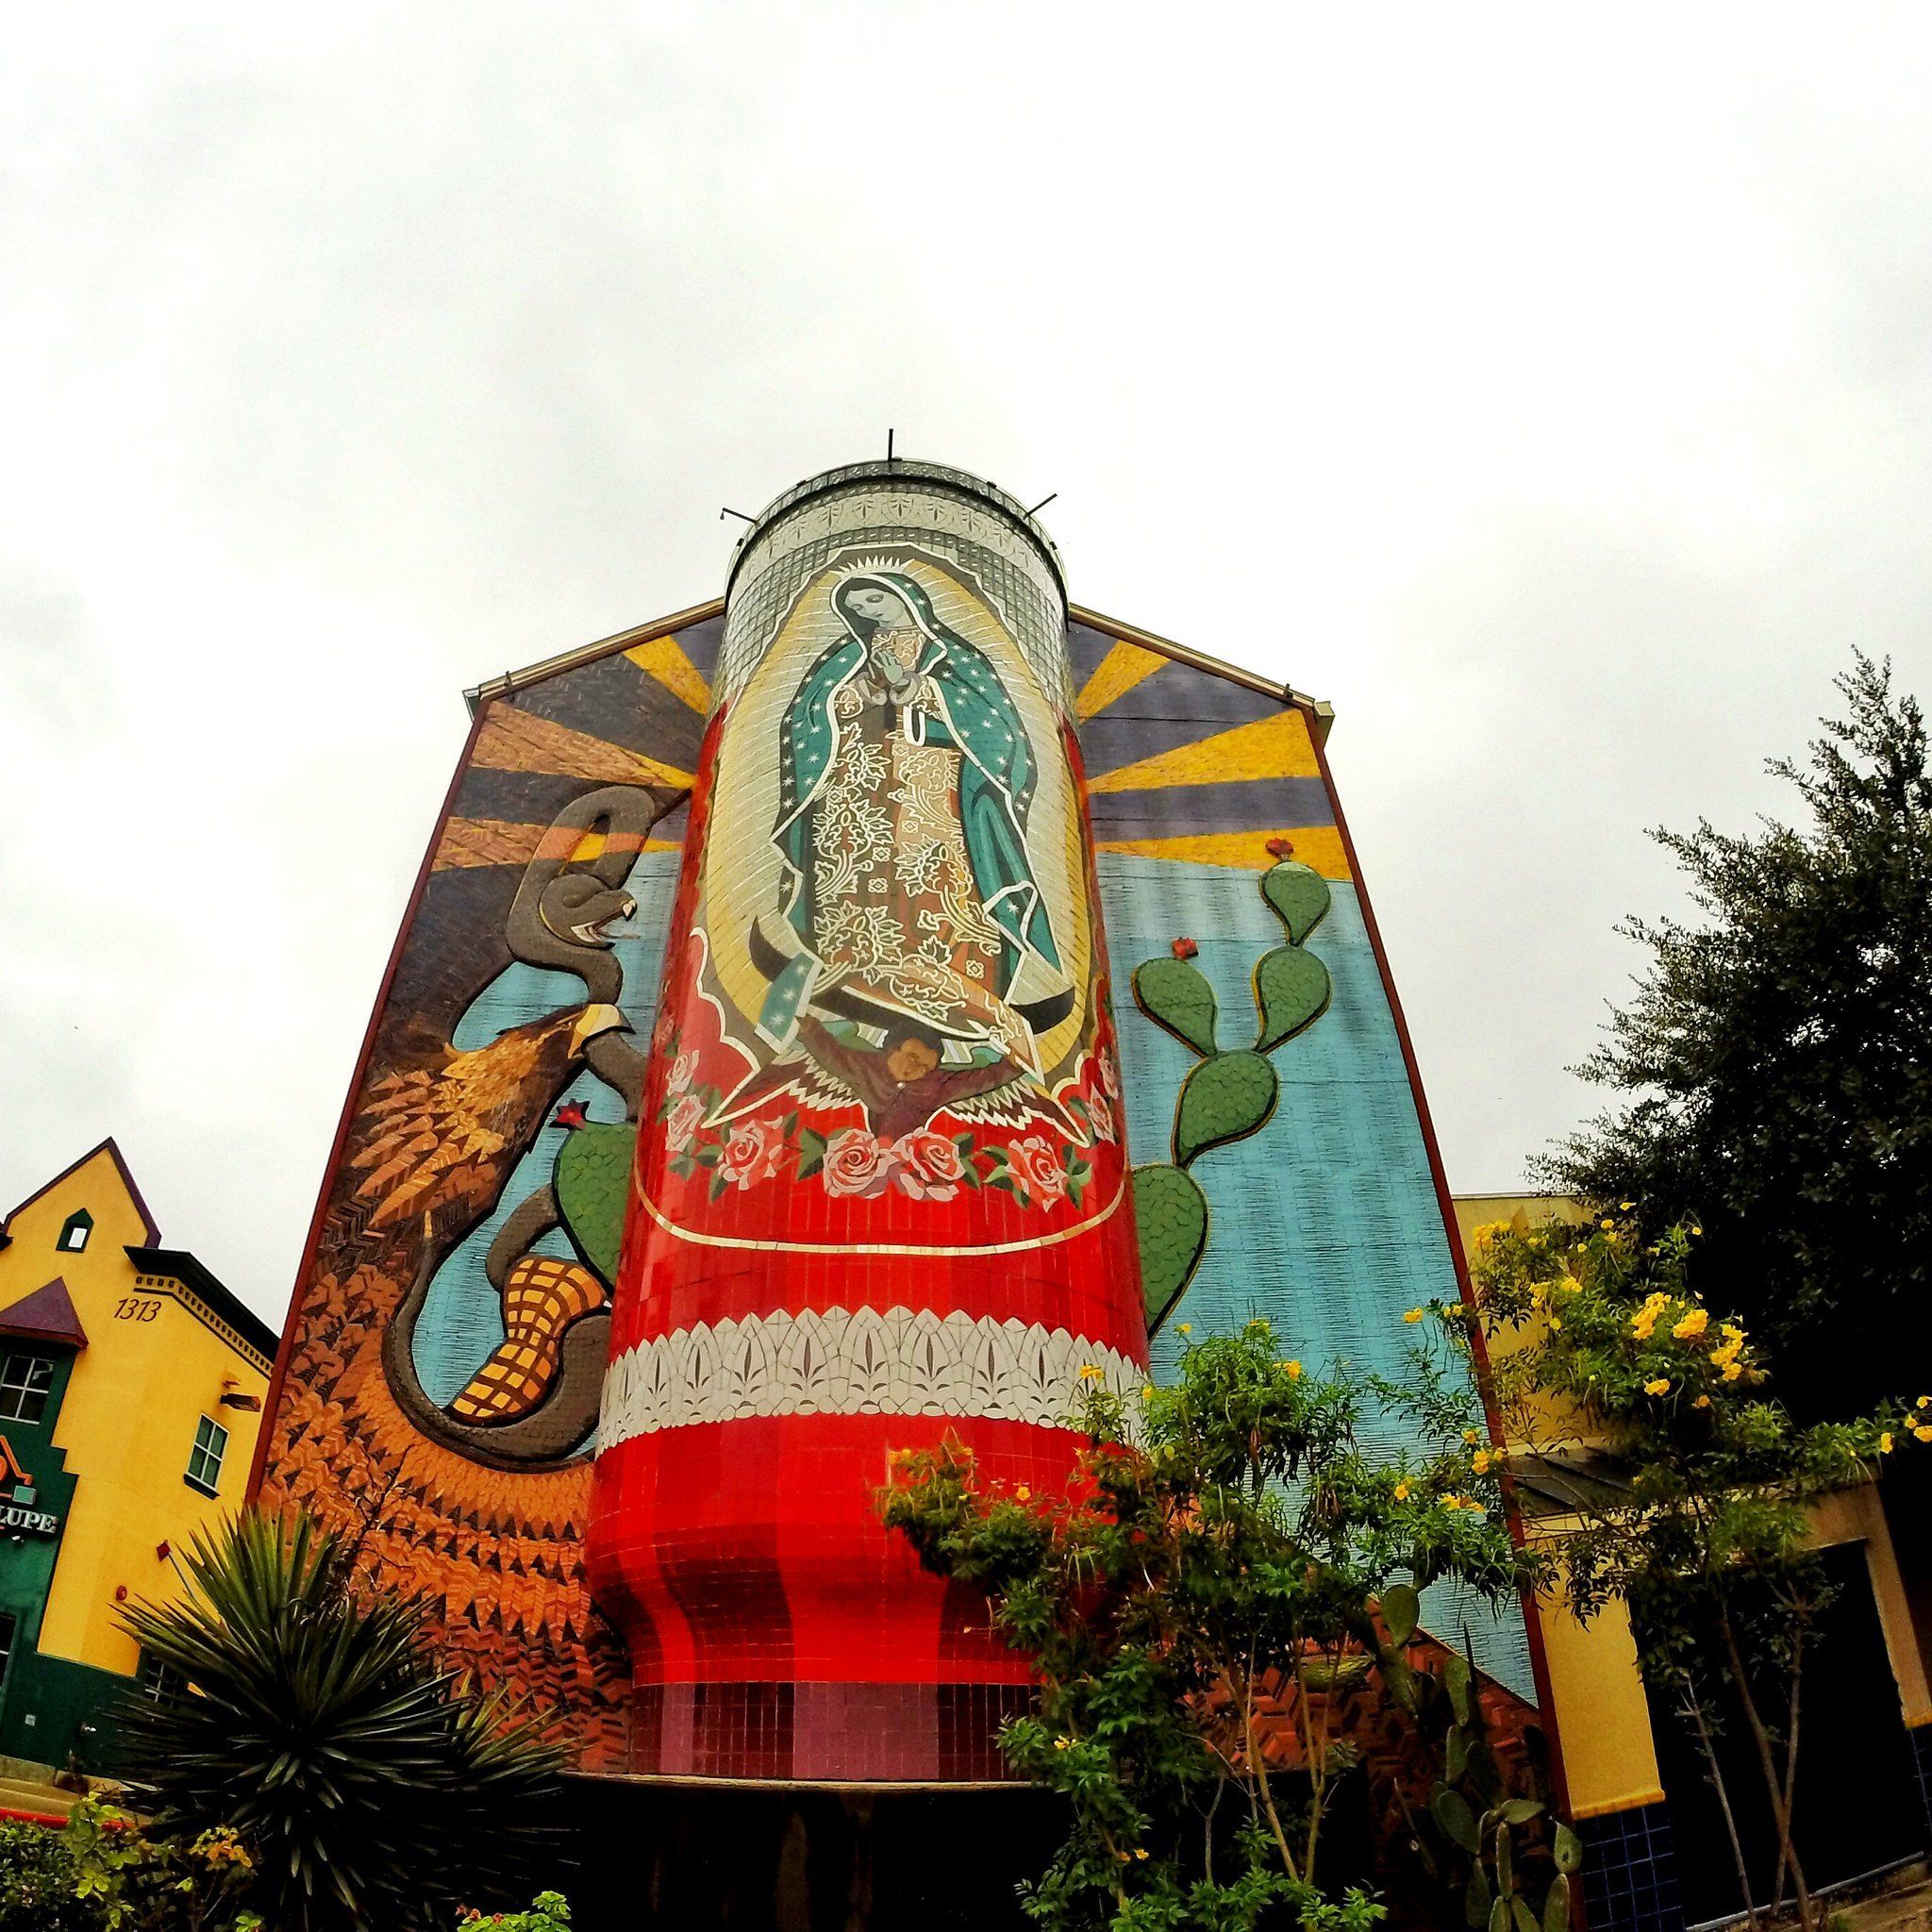 Guadalupe cultural arts center virgin mary painted on a giant red candle in san antonio